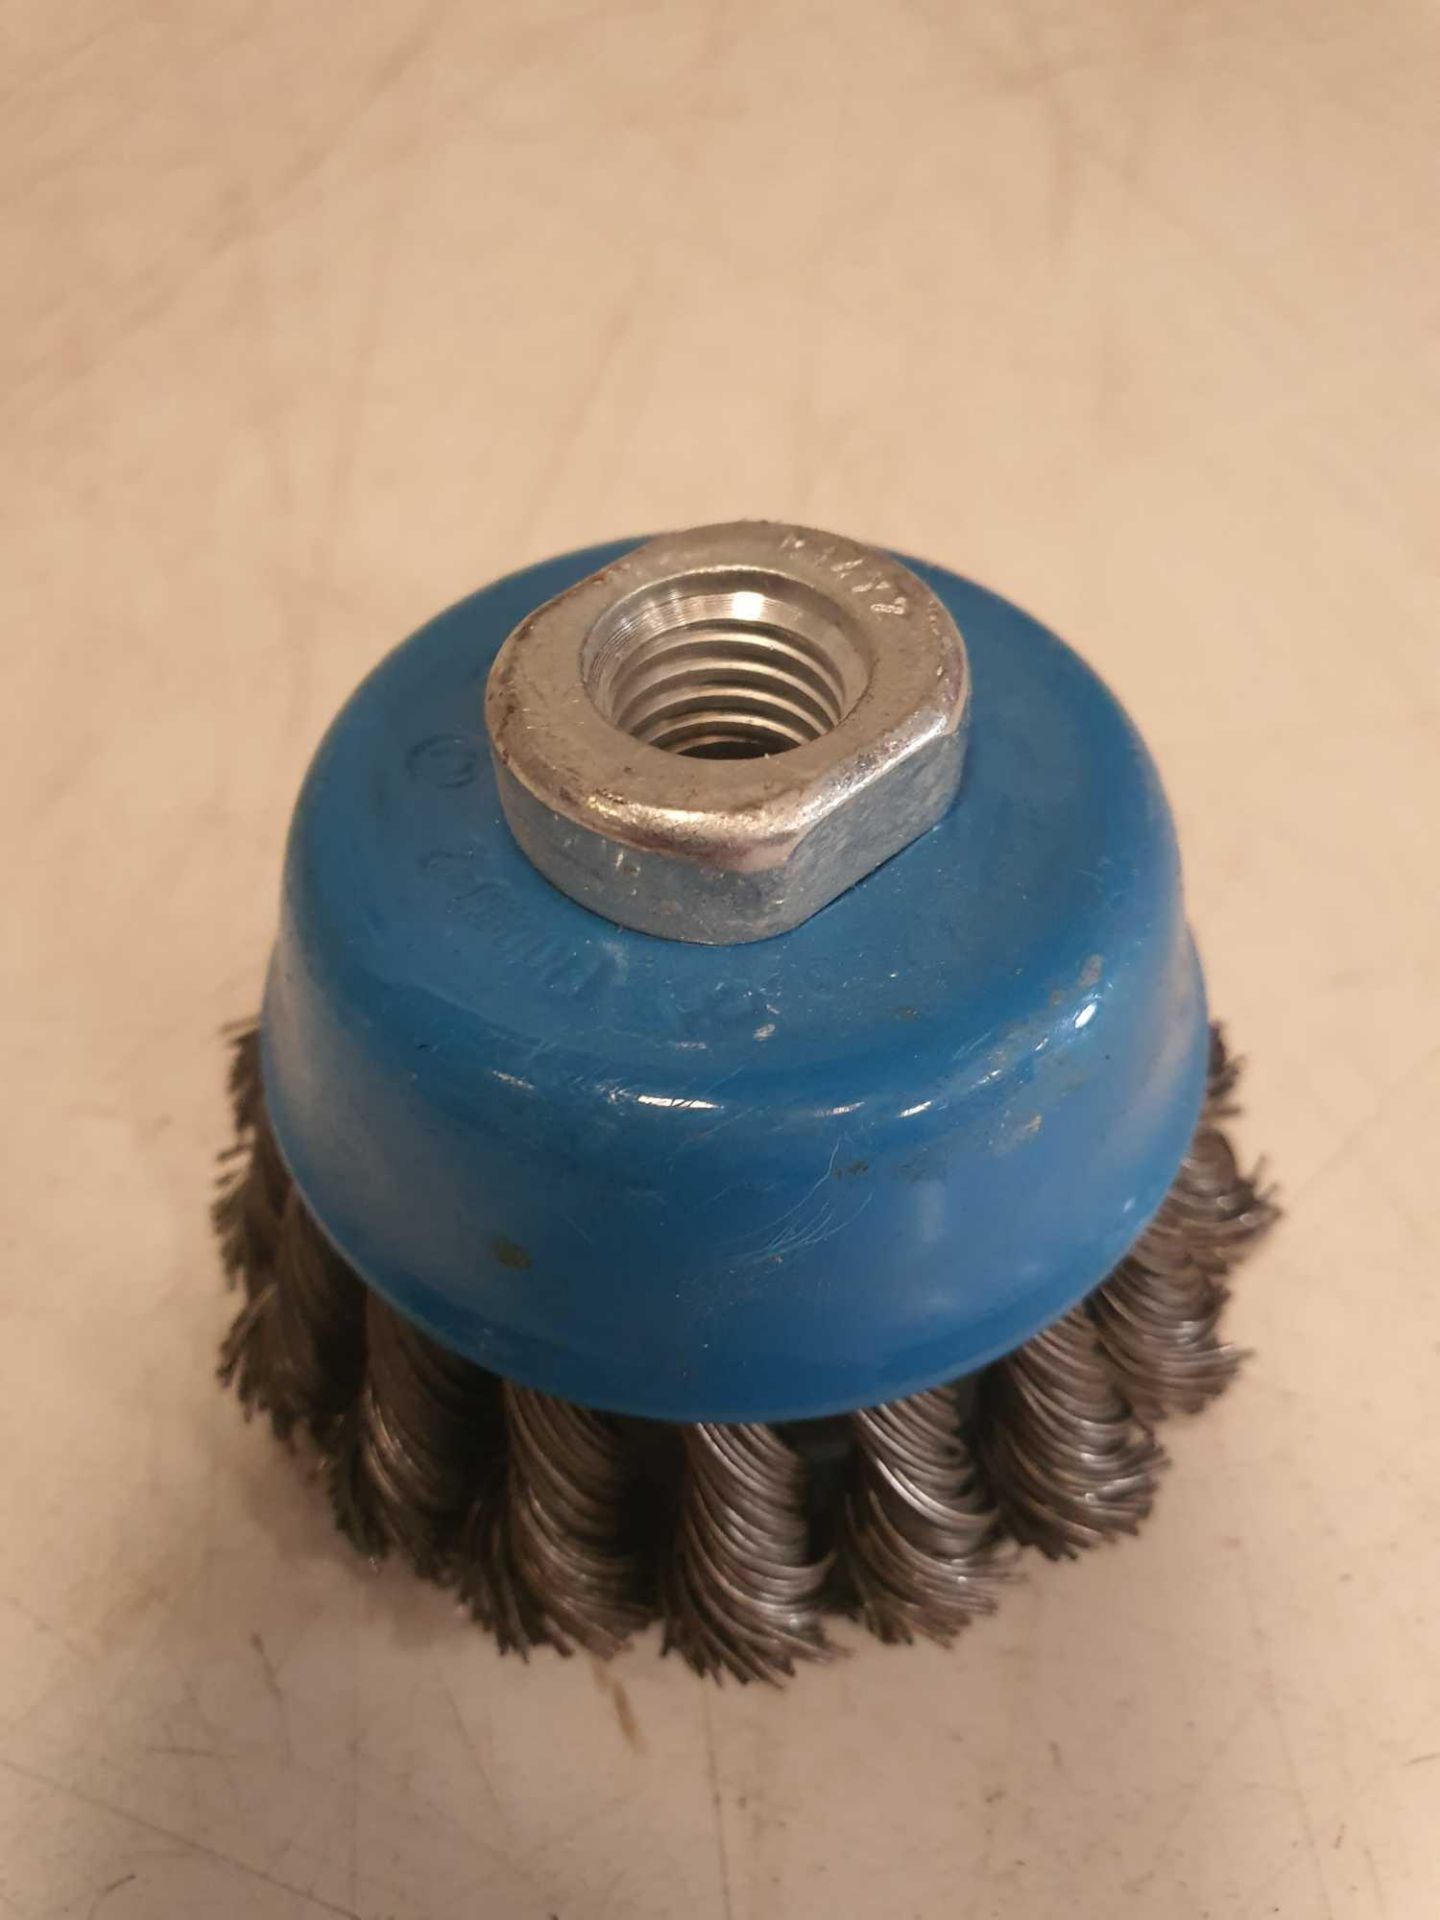 Bosch metal wire brush for grinder x 2 - Image 2 of 3